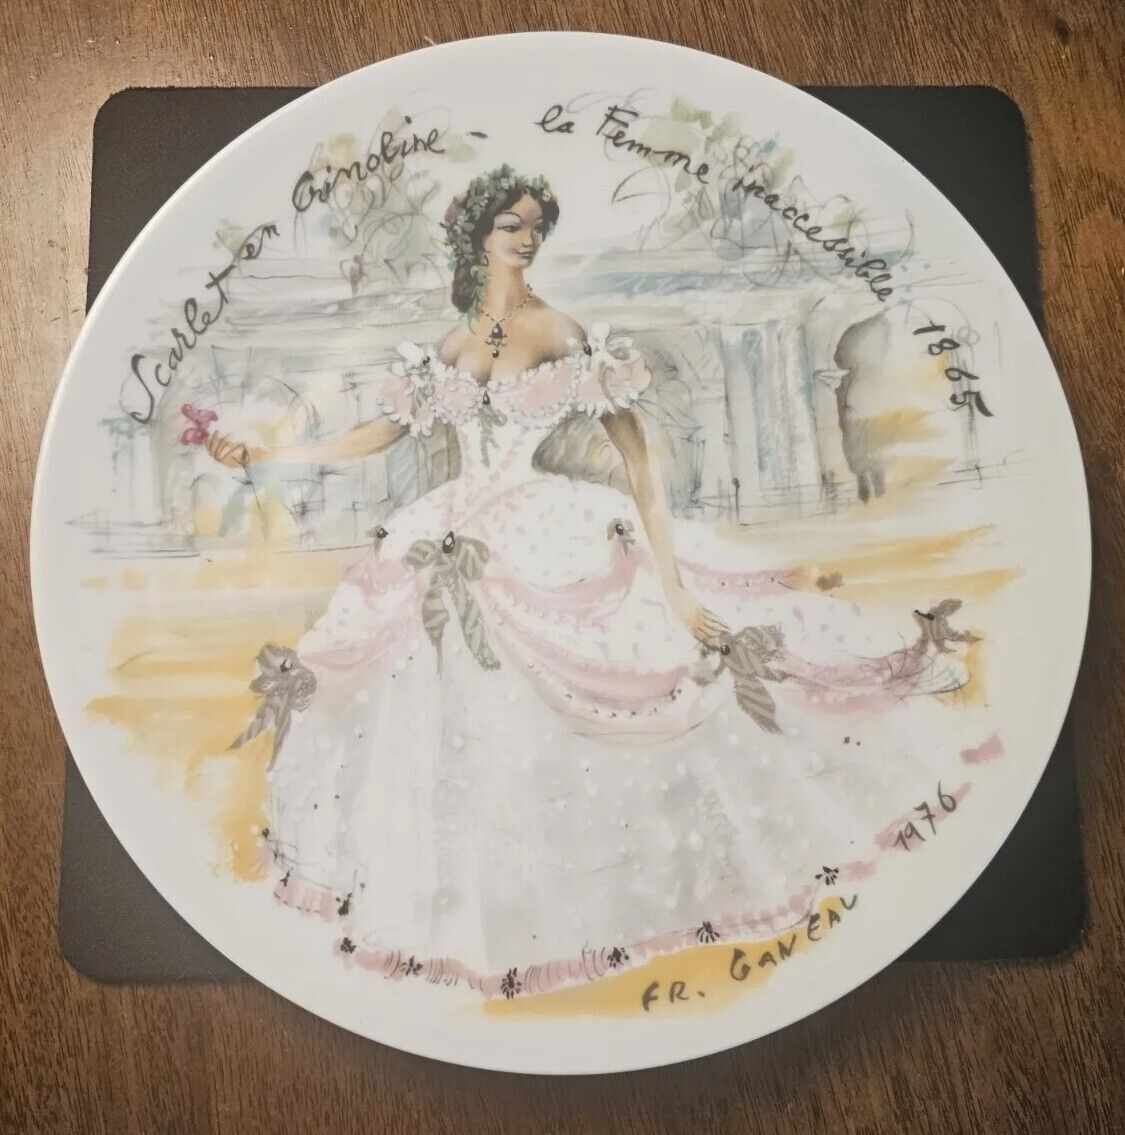 D\'arceau-Limoges French Plate |Scarlet in Crinoline -The Inaccessible Woman 1865